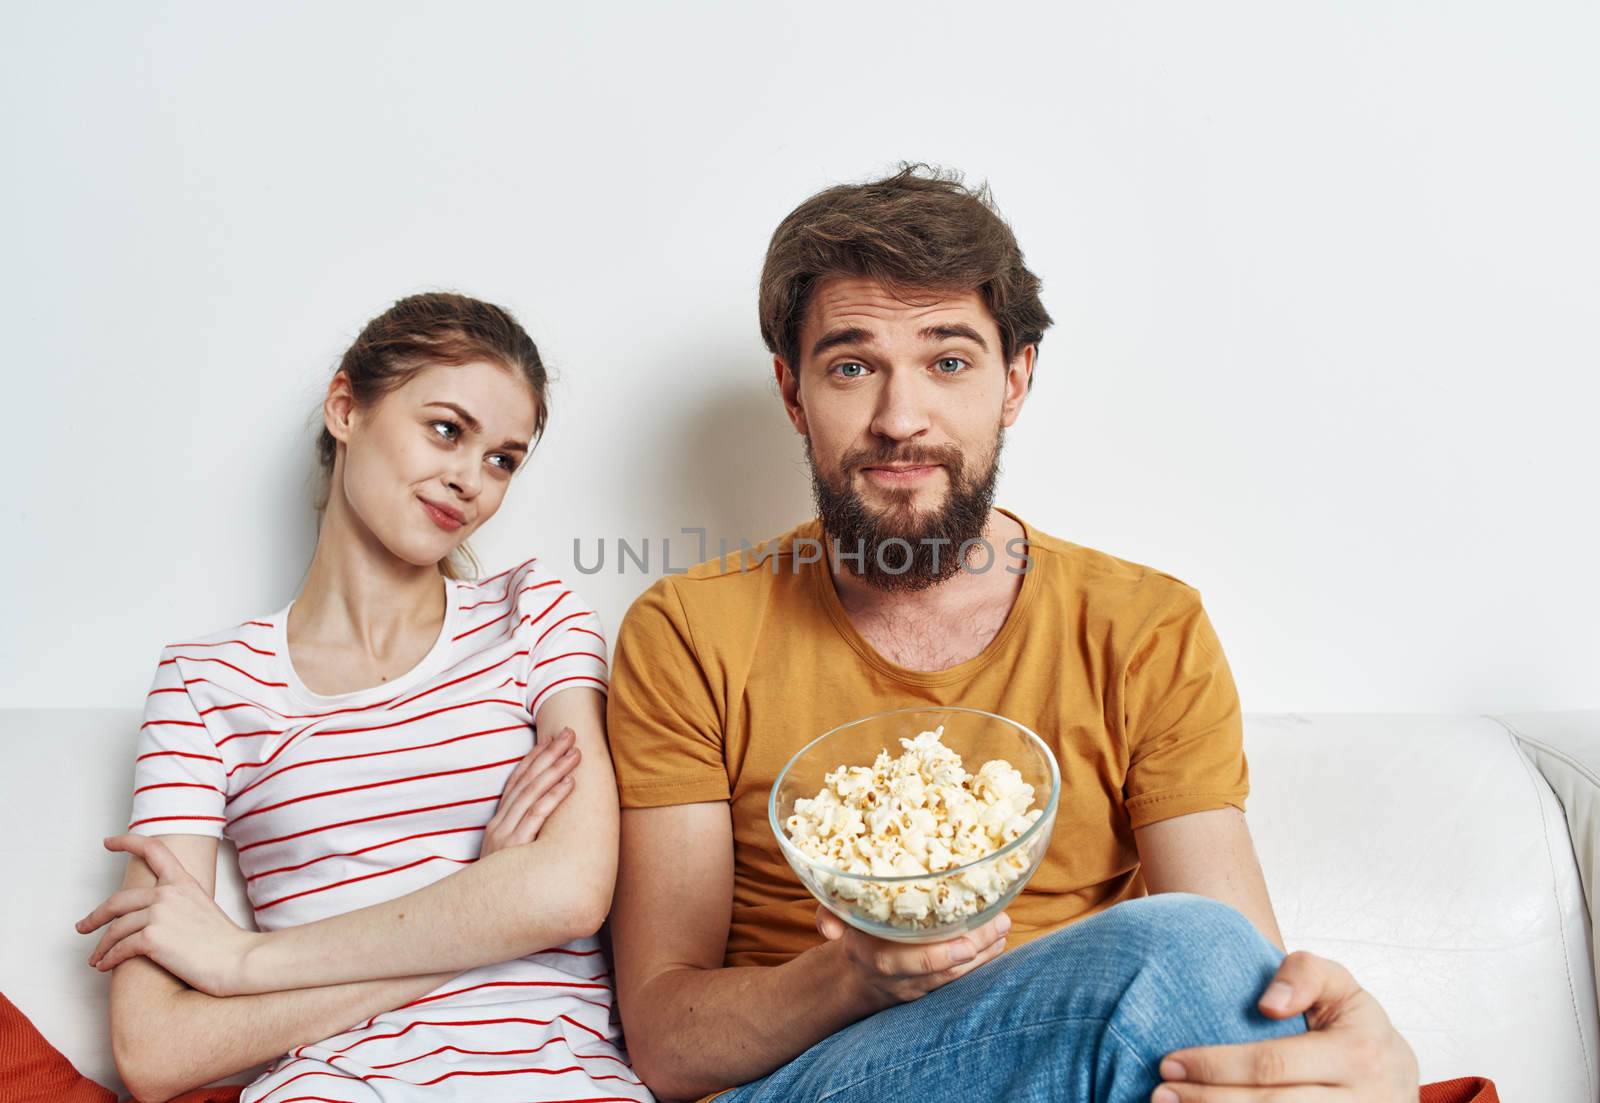 Man and woman on the couch with popcorn watching TV shows by SHOTPRIME